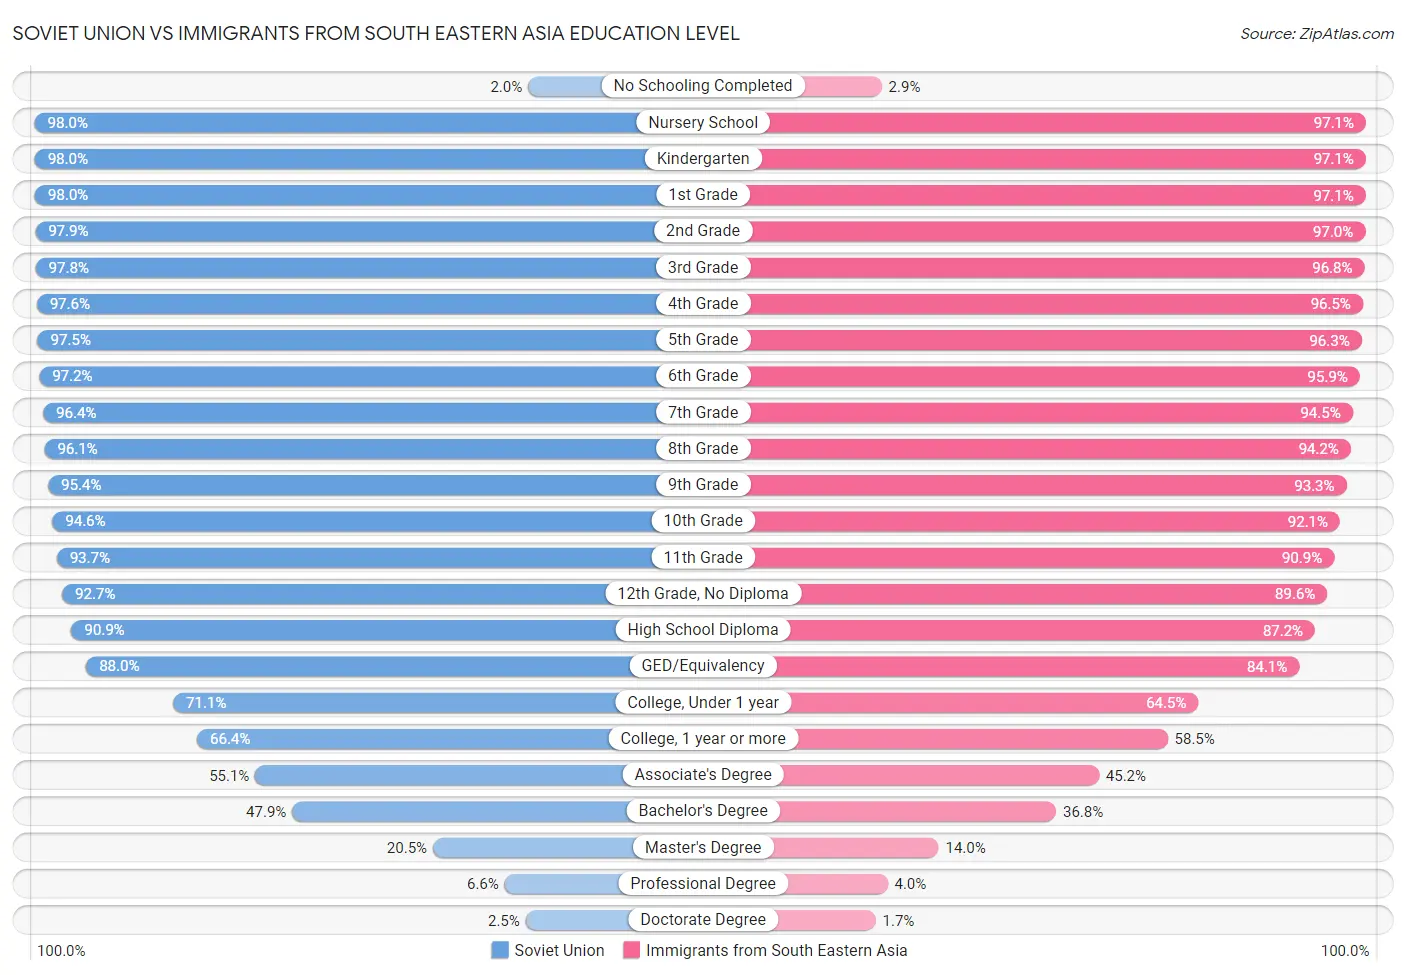 Soviet Union vs Immigrants from South Eastern Asia Education Level